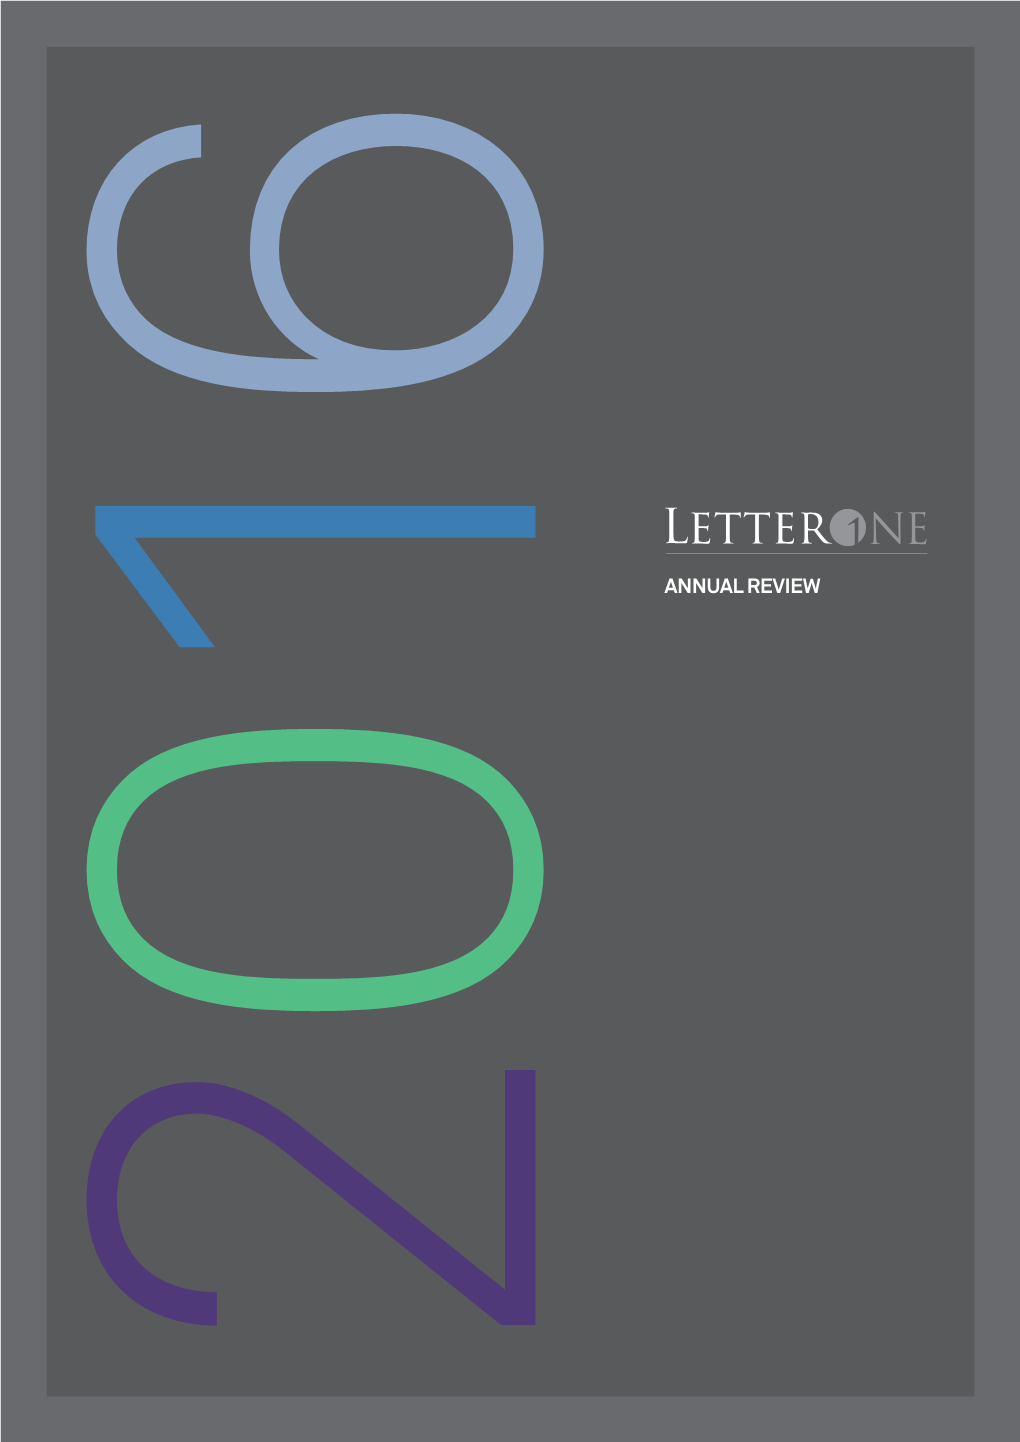 Letterone Annual Review 2016 01